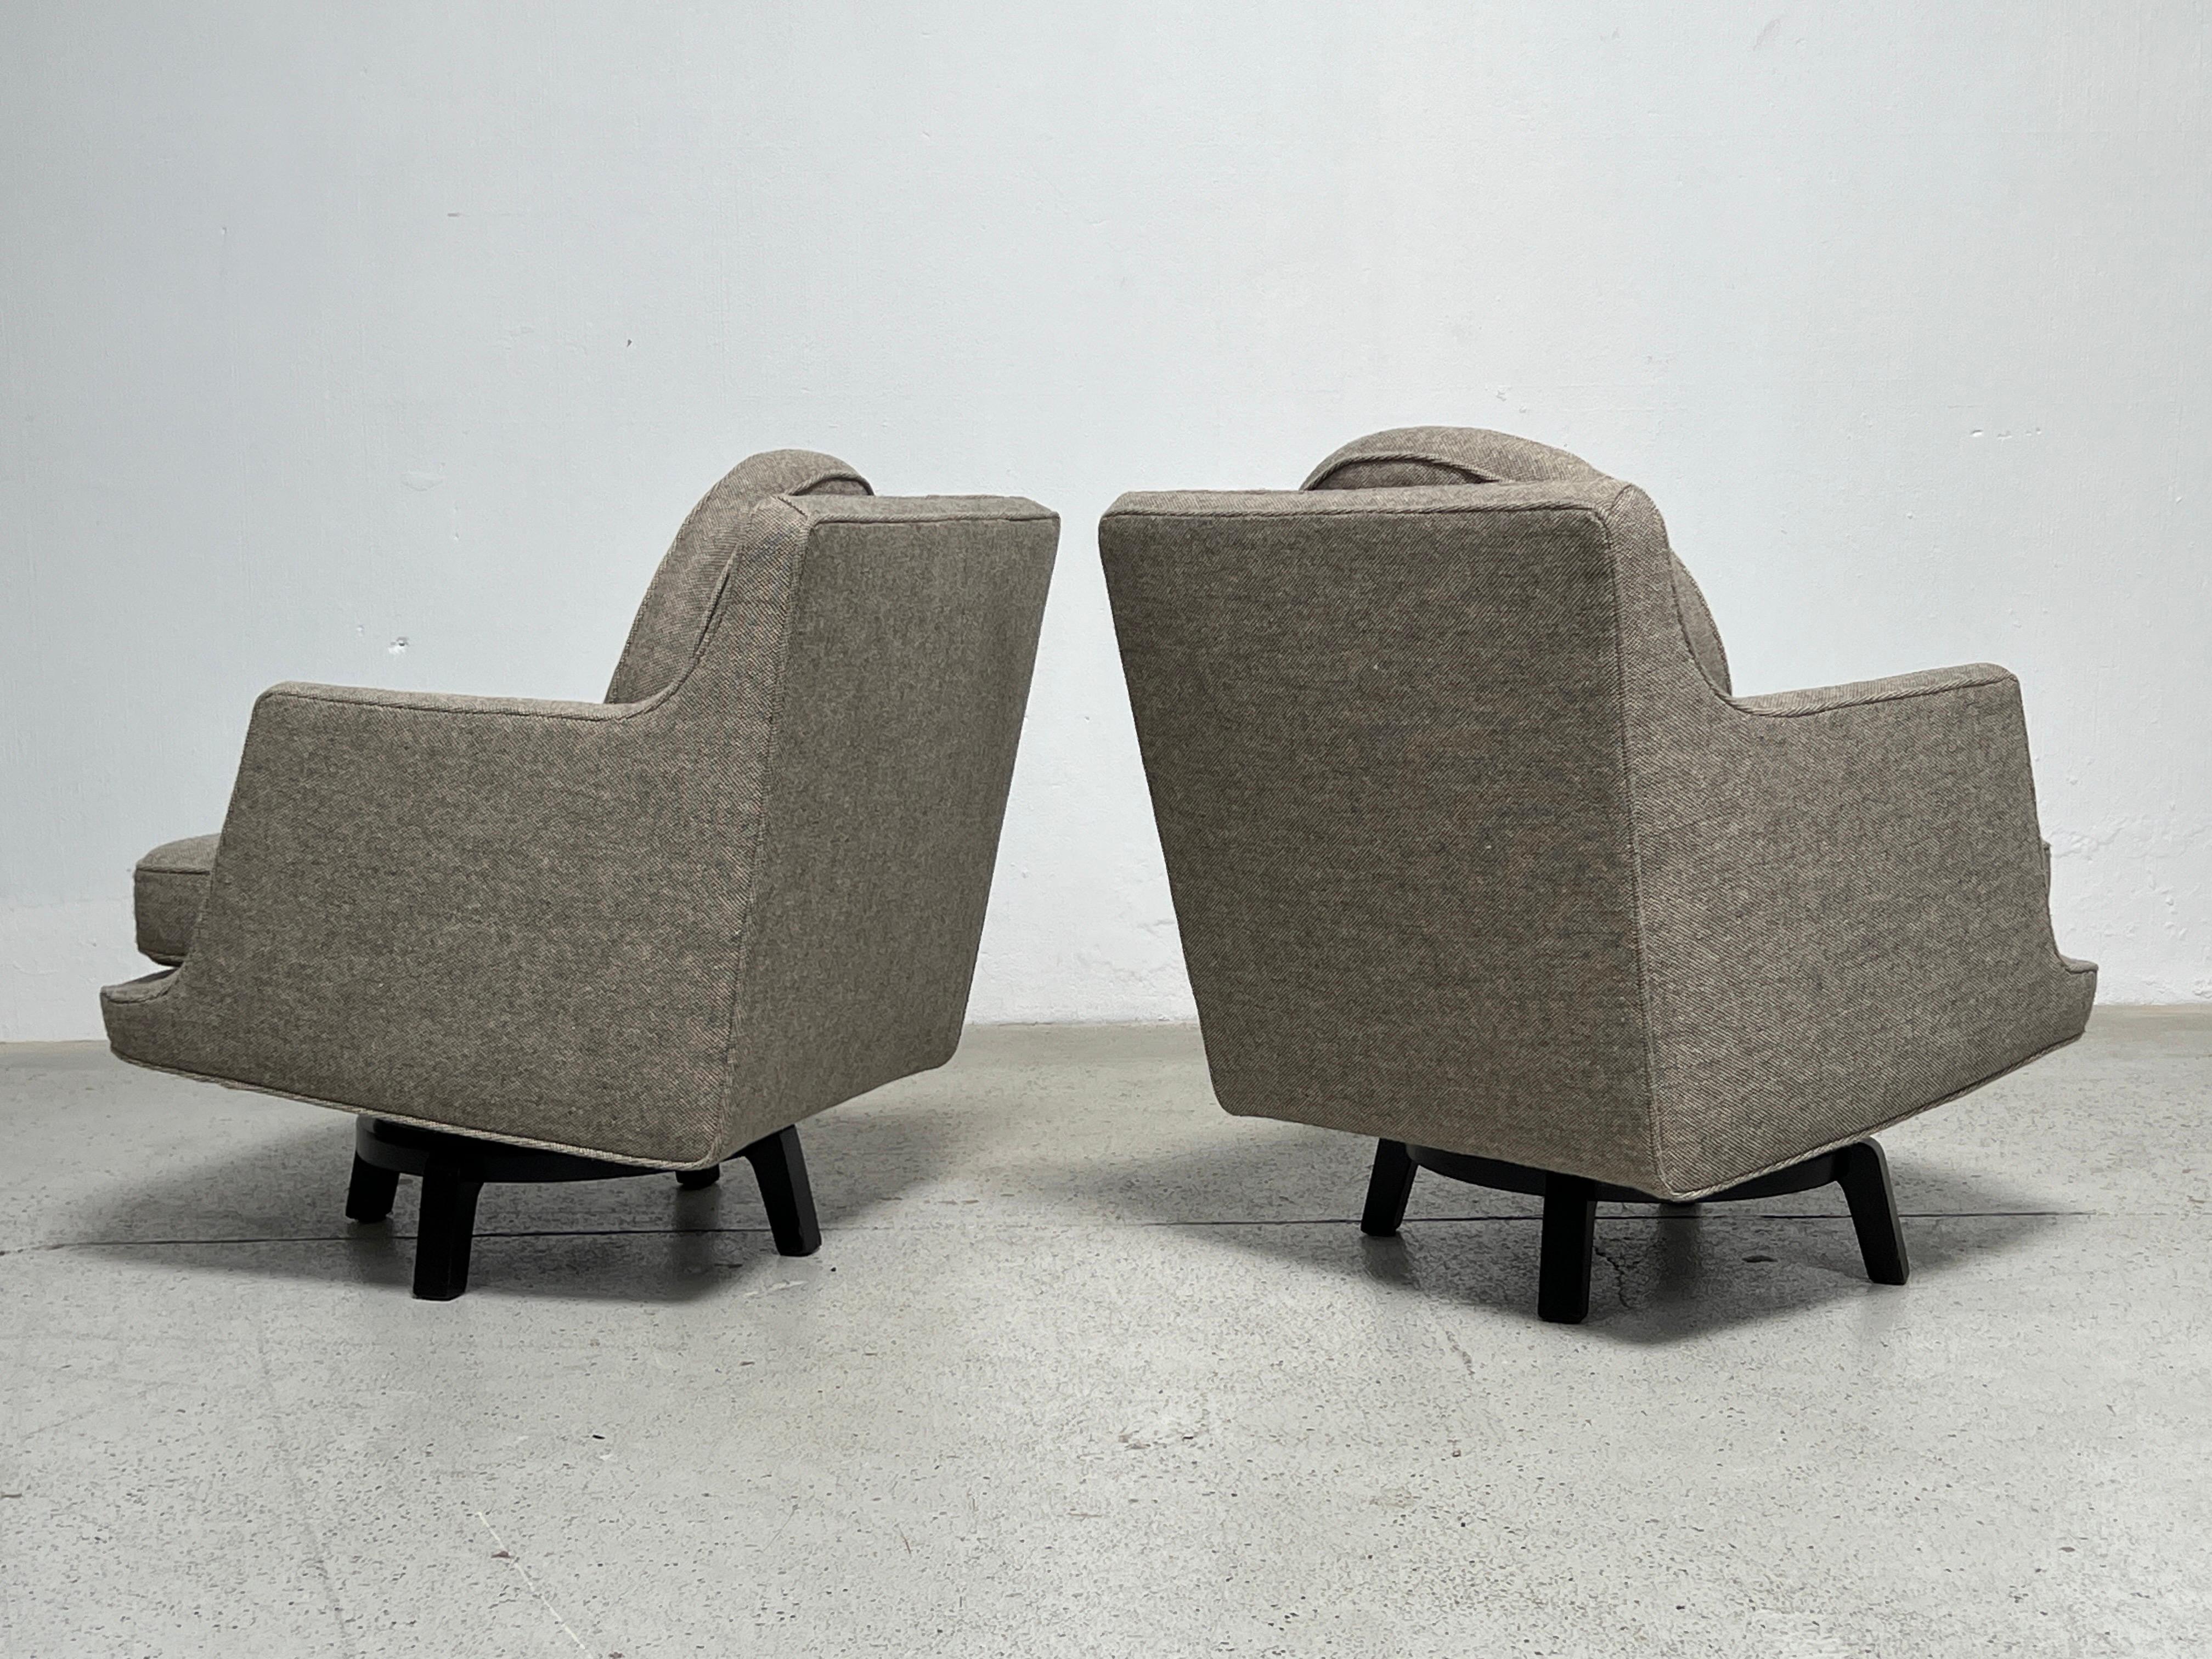 Fabric Pair of Swivel Chairs by Edward Wormley for Dunbar